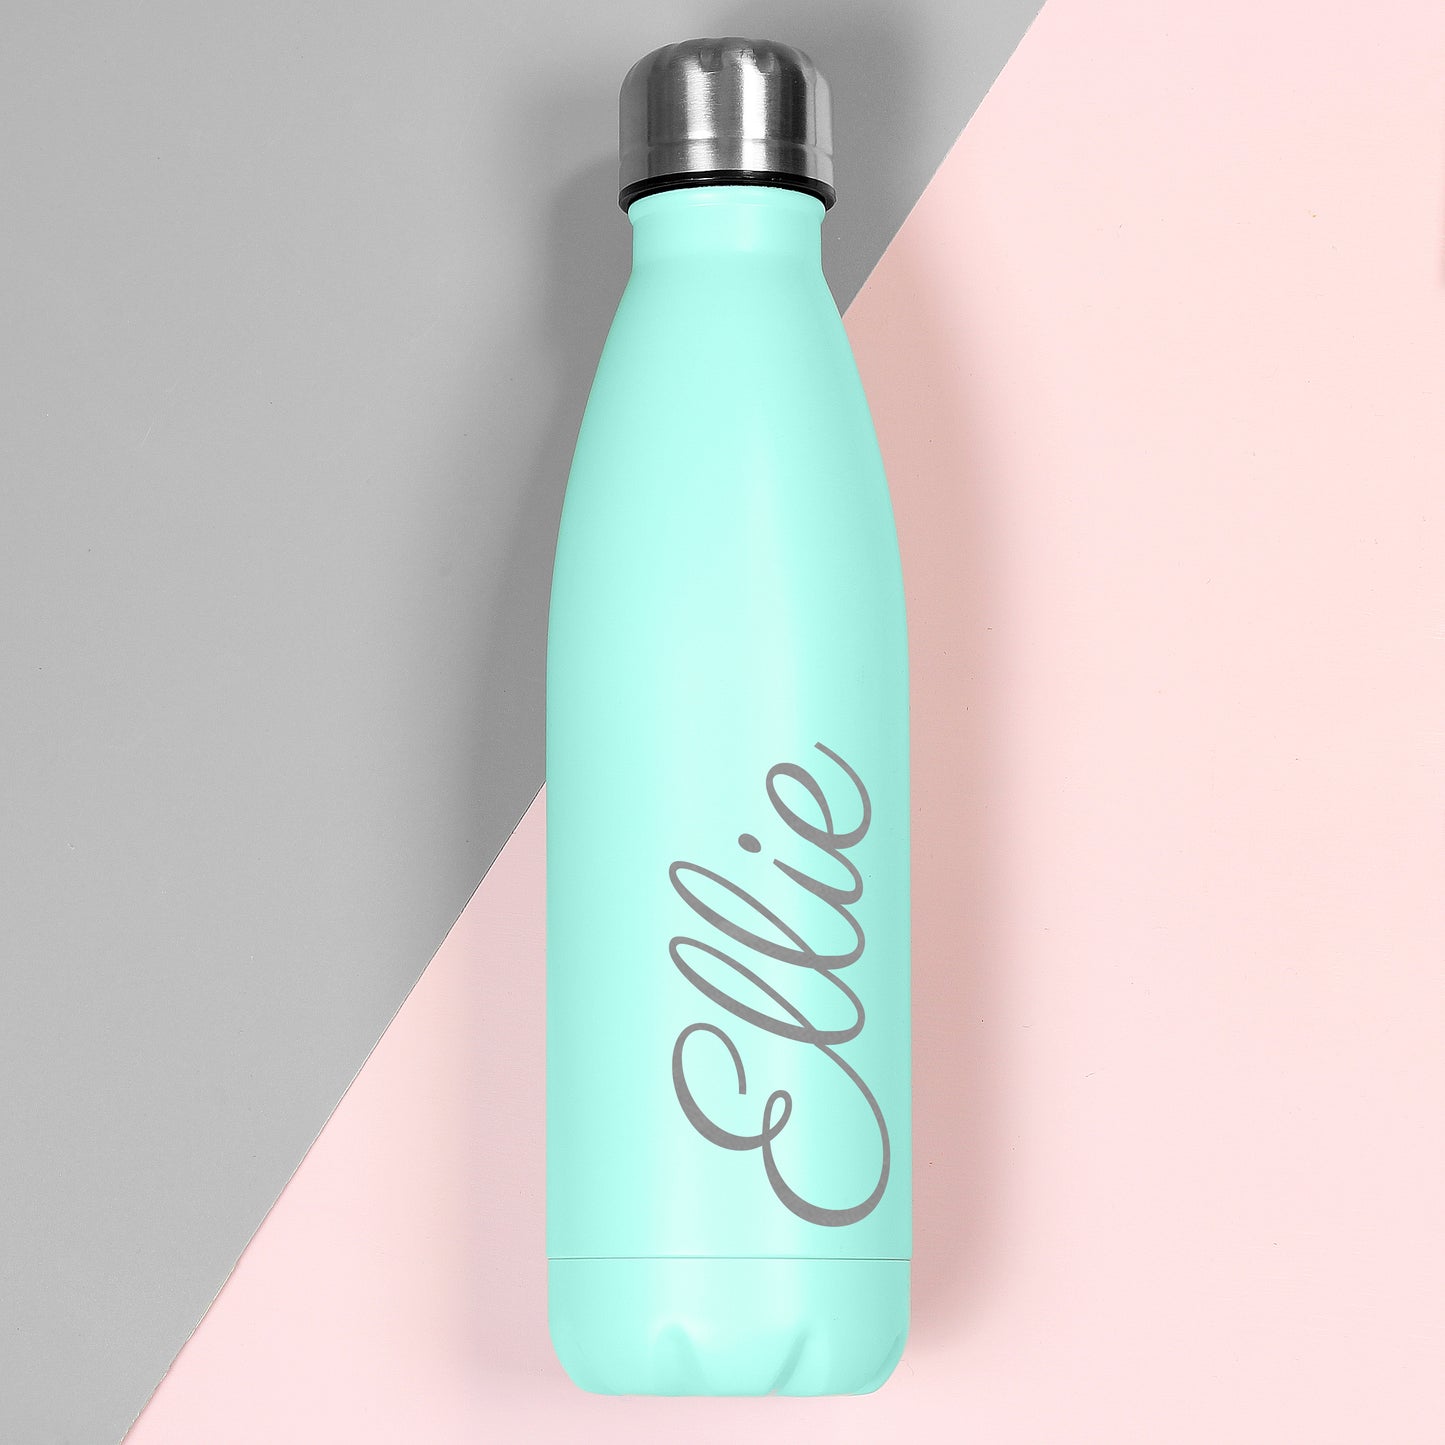 Mint green metal insulated drinks bottle - Lilybet loves